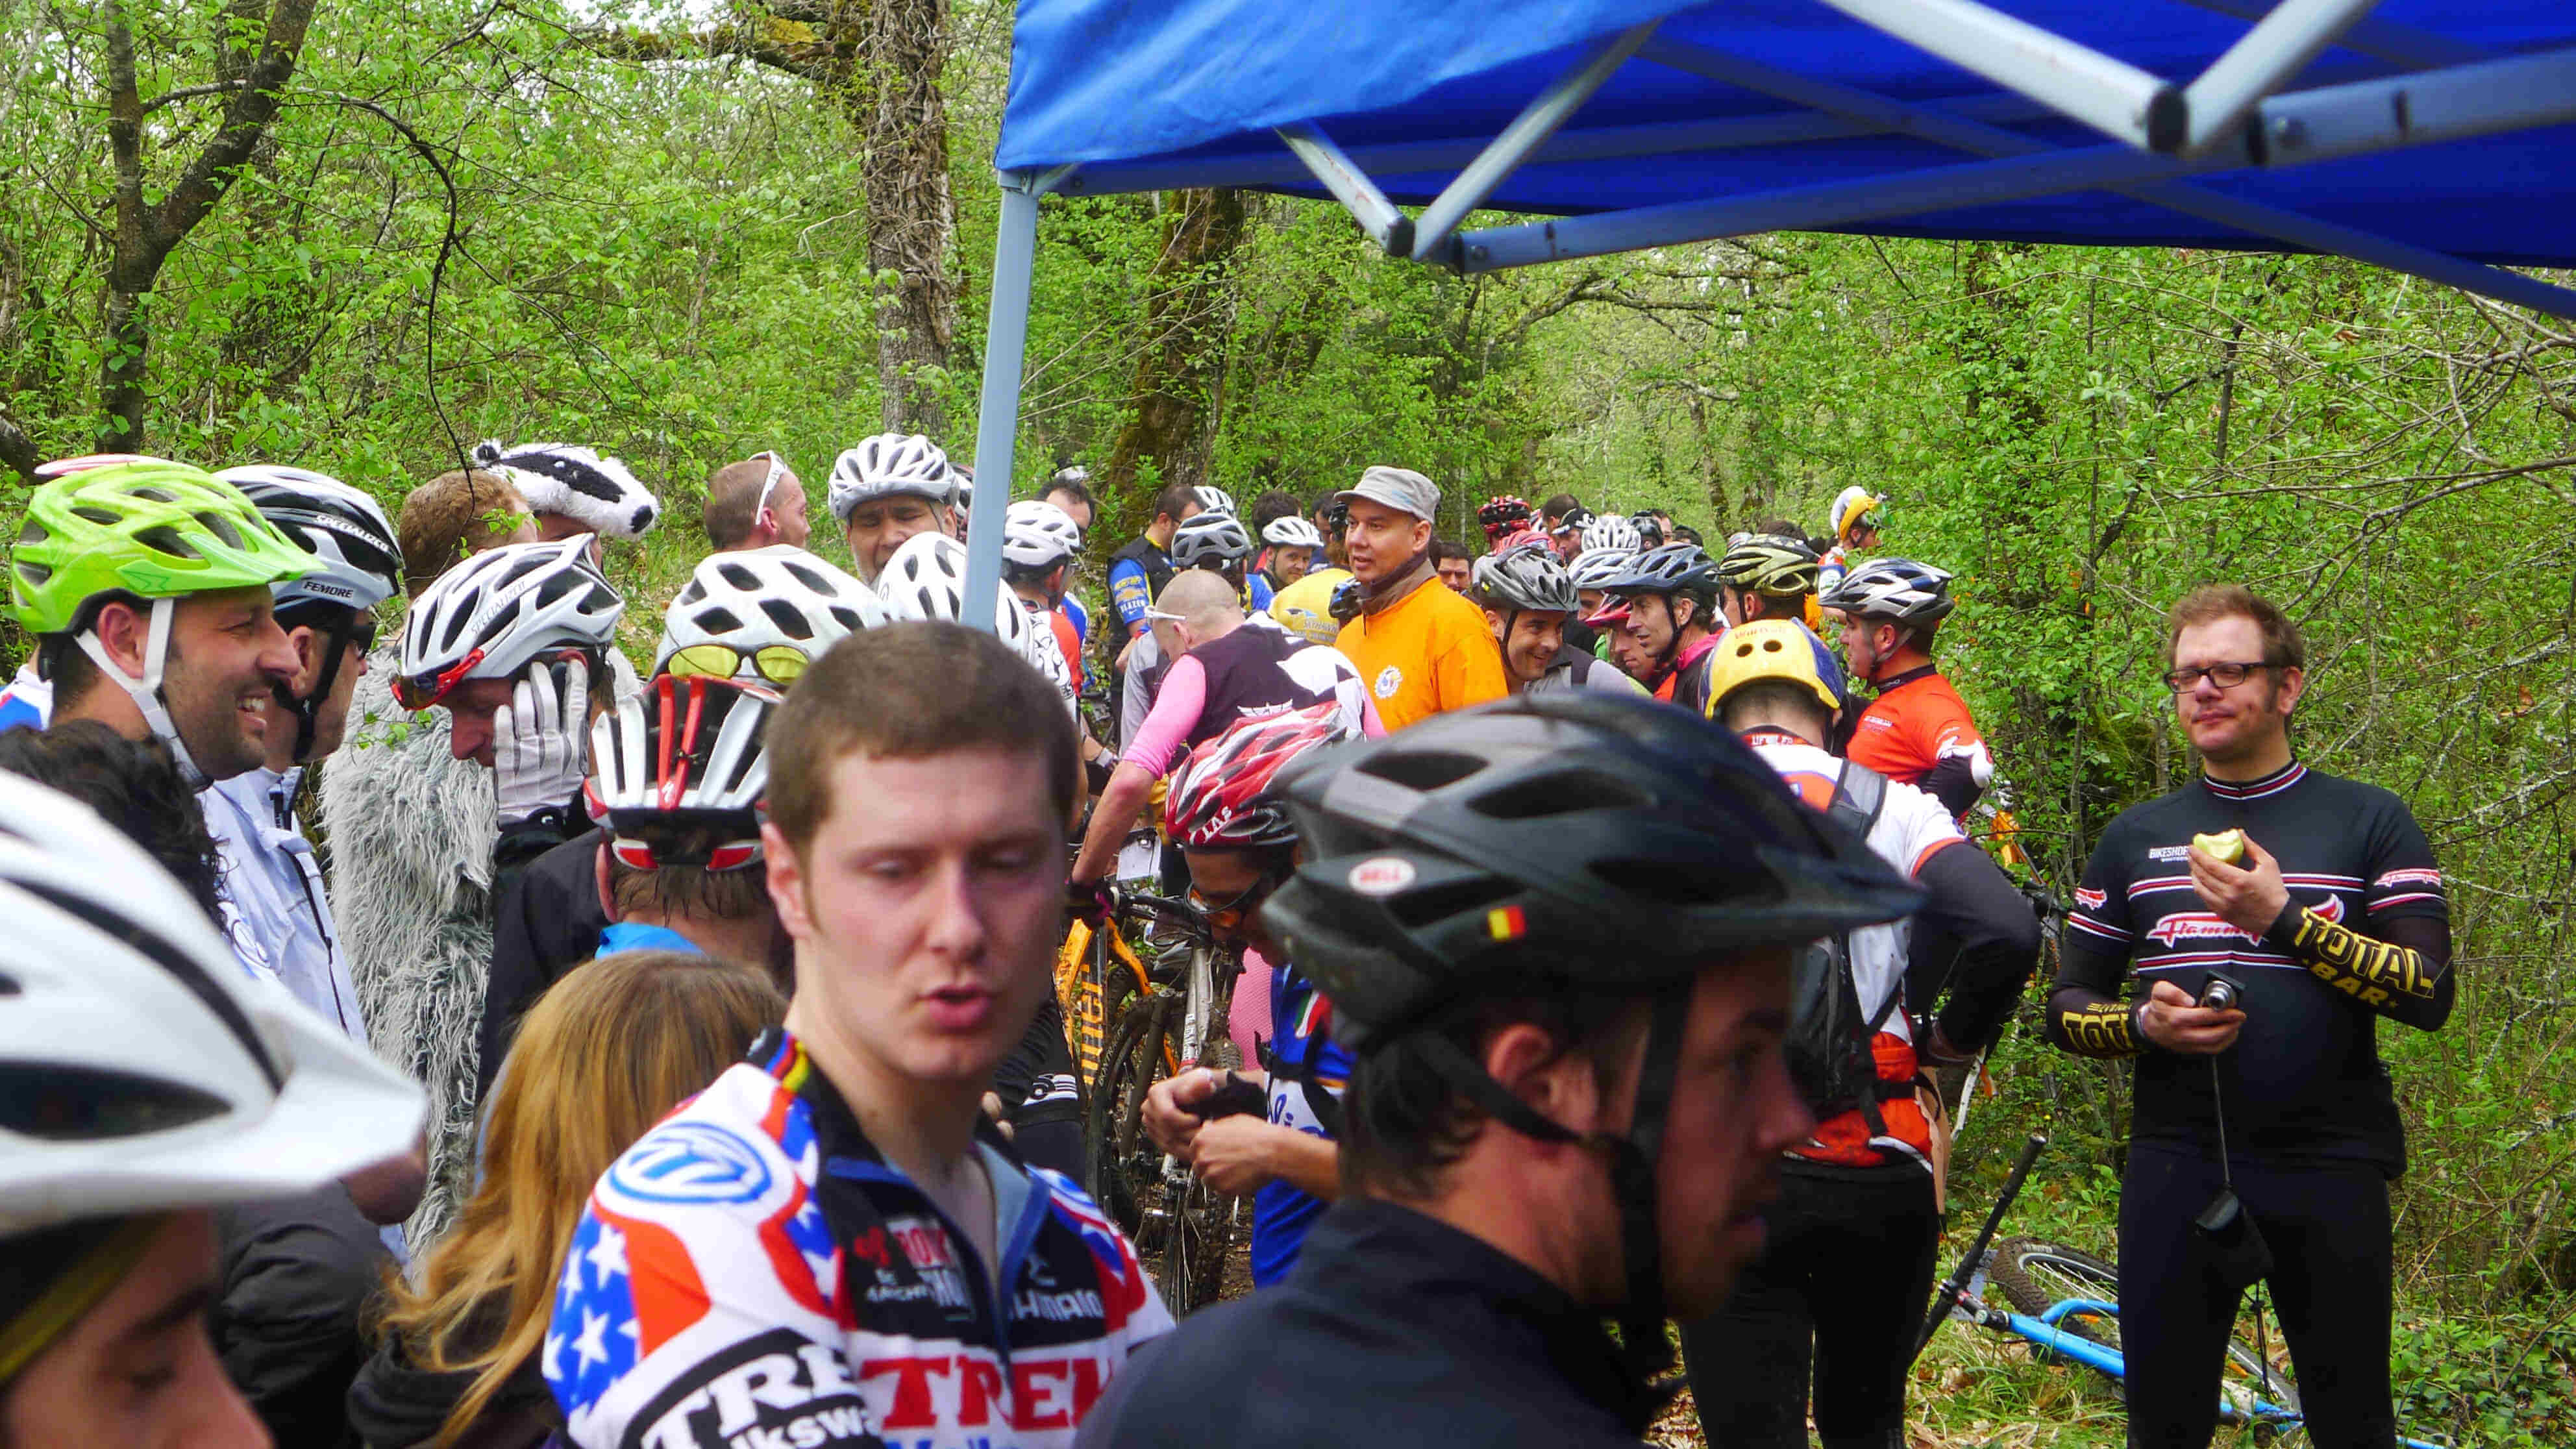 A chest up view of a group of cyclists, standing near a blue canopy, in the woods